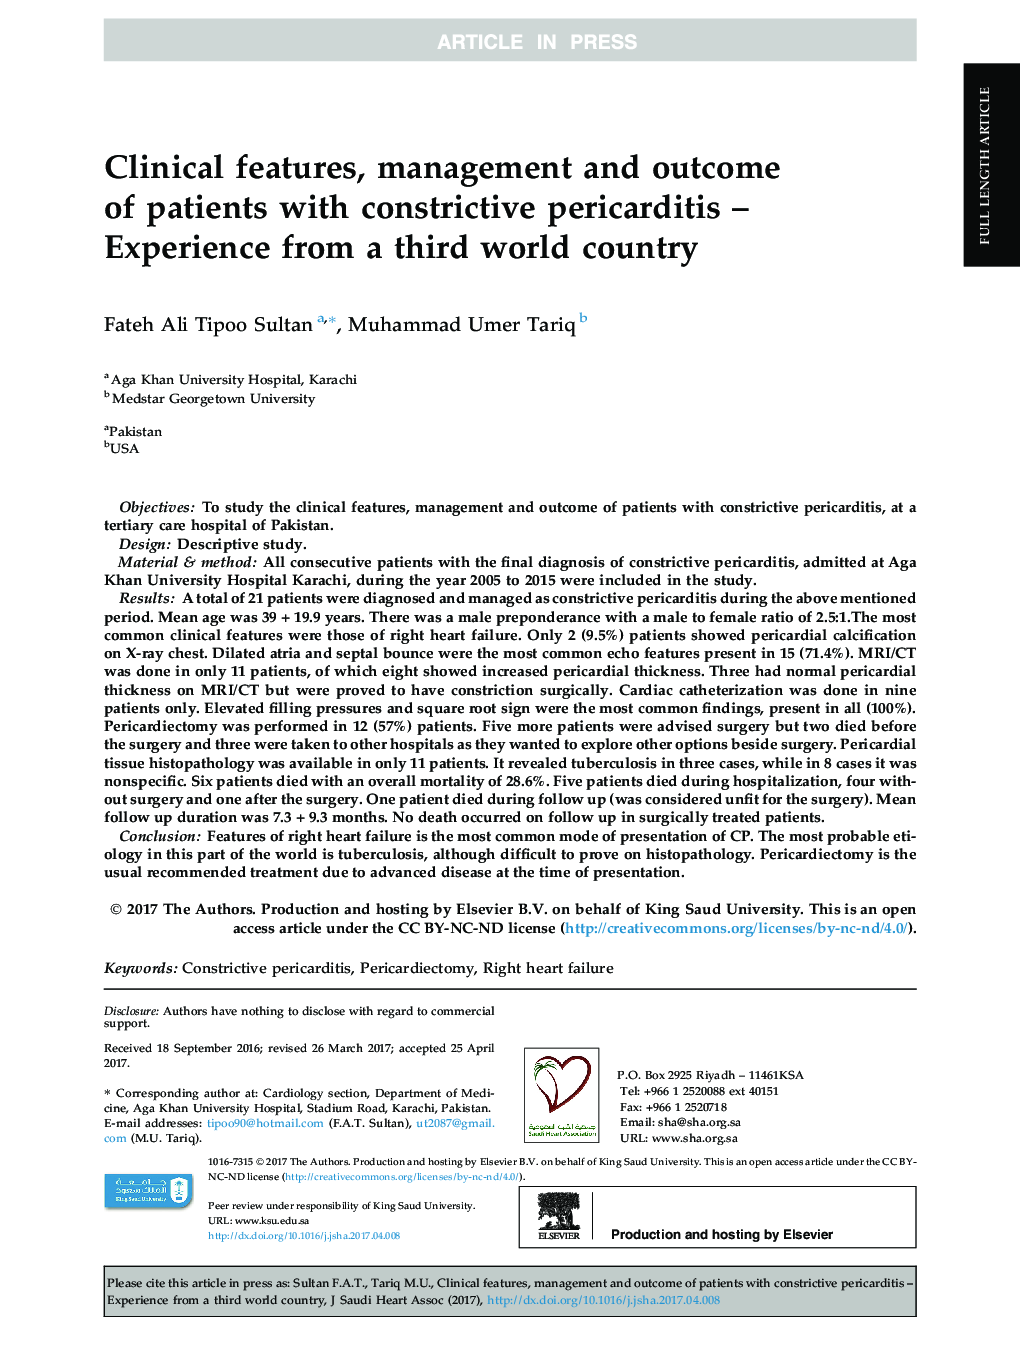 Clinical features, management and outcome of patients with constrictive pericarditis - Experience from a third world country